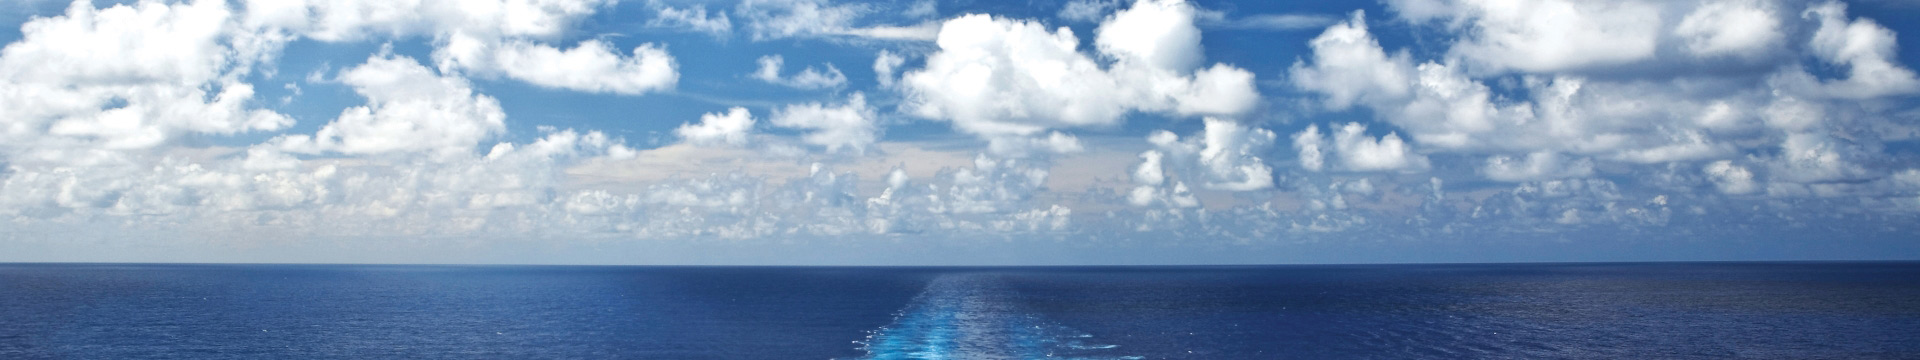 Ocean with ship trail with fluffy white clouds and a deep blue sky.